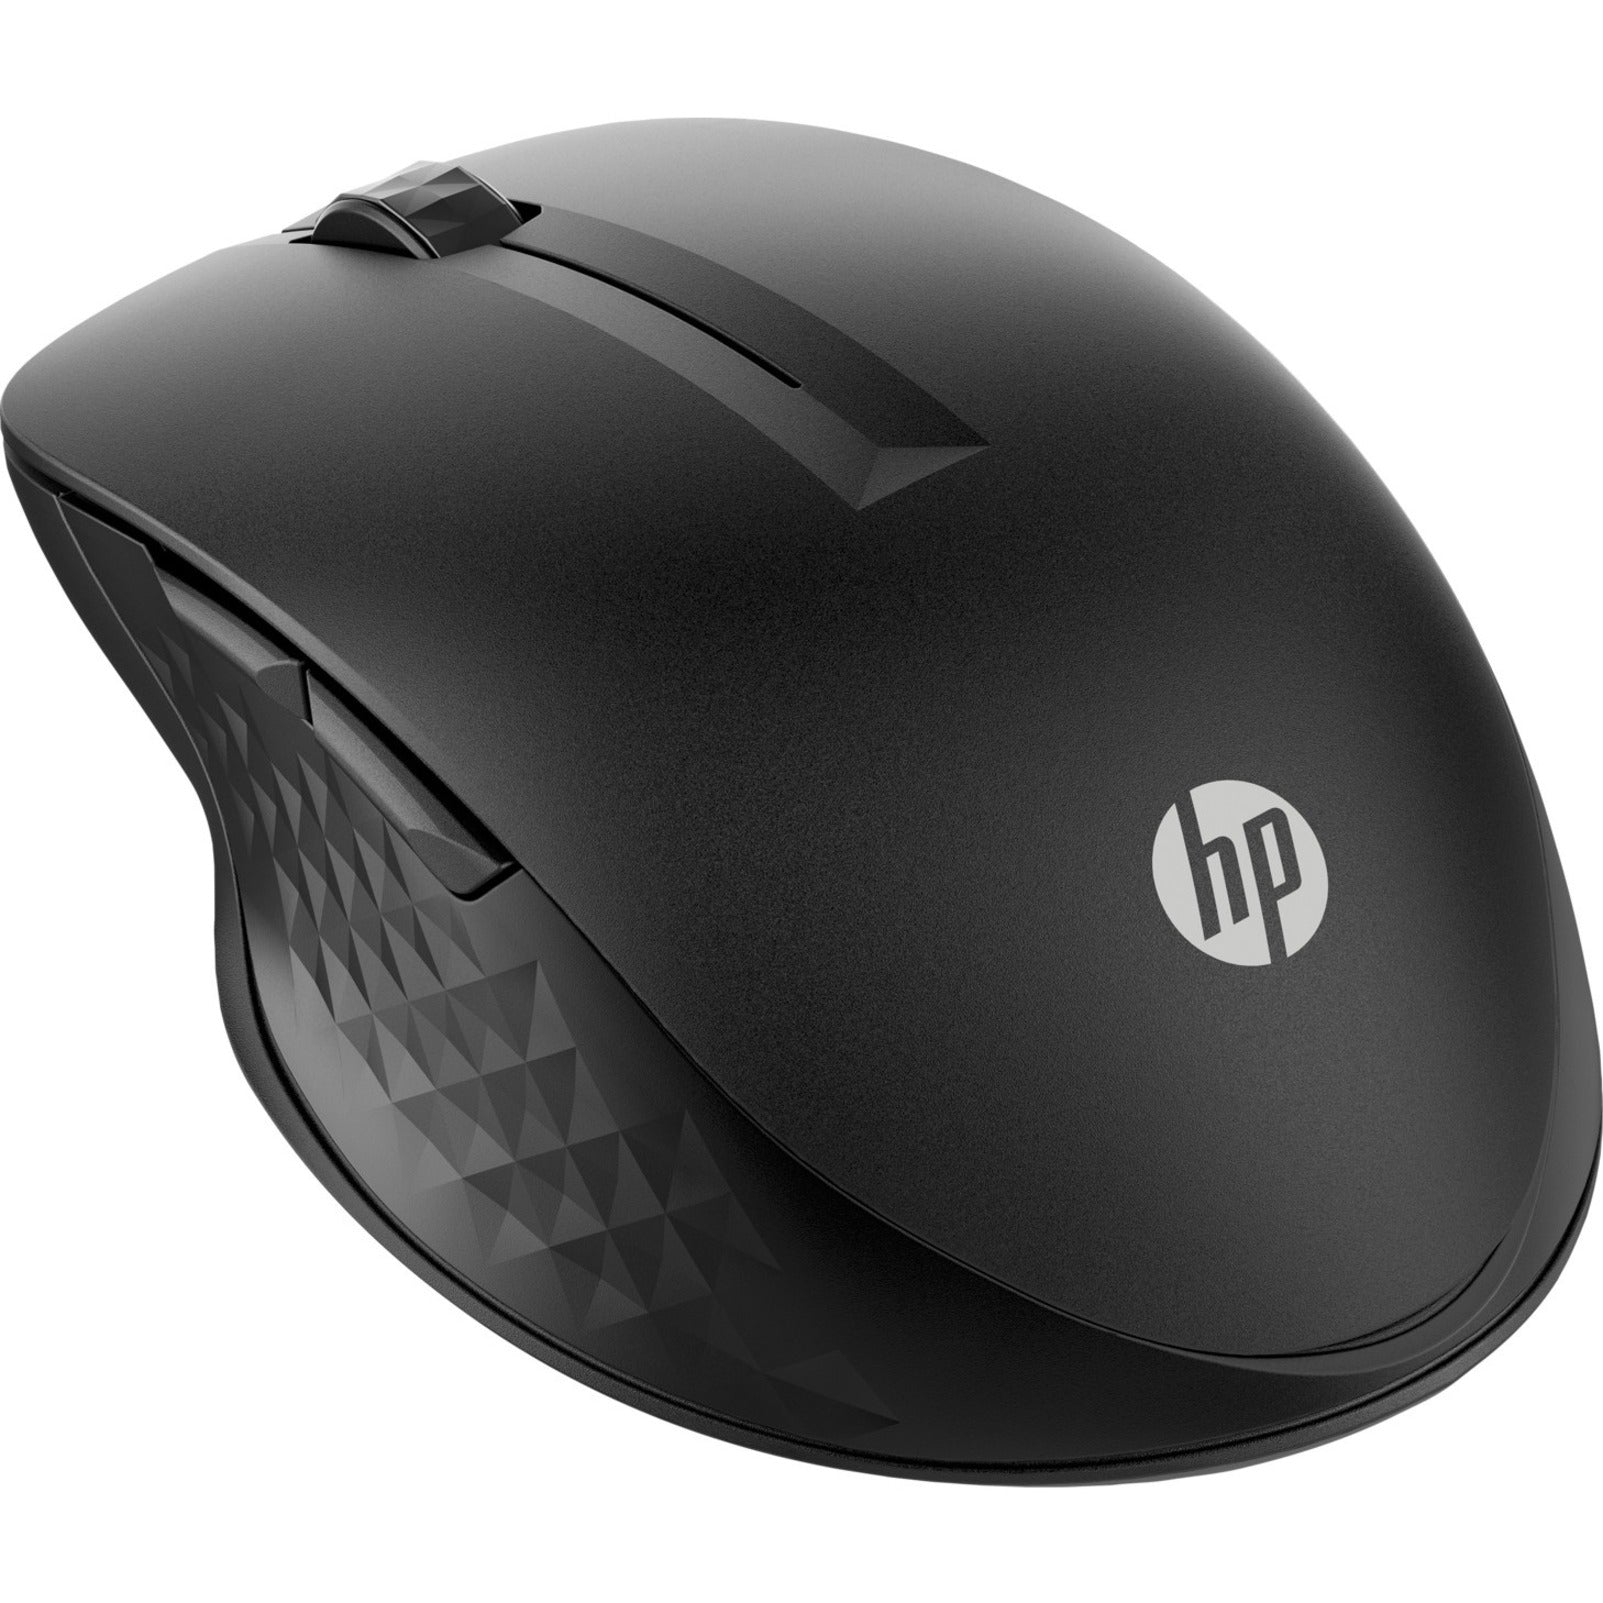 HP 3B4Q2AA#ABL 430 Multi-Device Wireless Mouse, Blue Optical, 4000 dpi, 5 Buttons